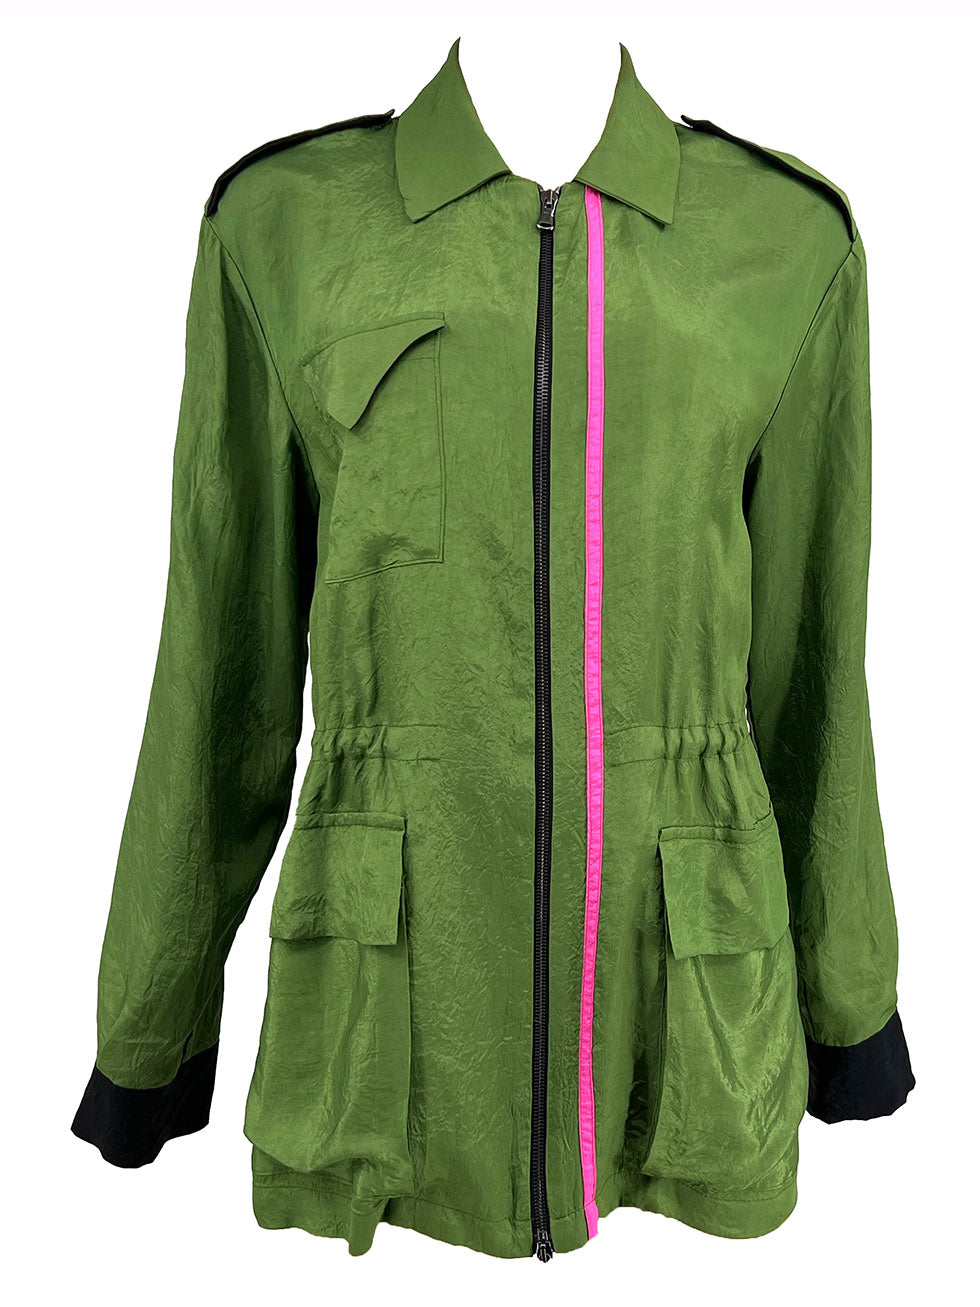 Green Acetate Cargo Jacket with Pink Stripe - MADE TO ORDER